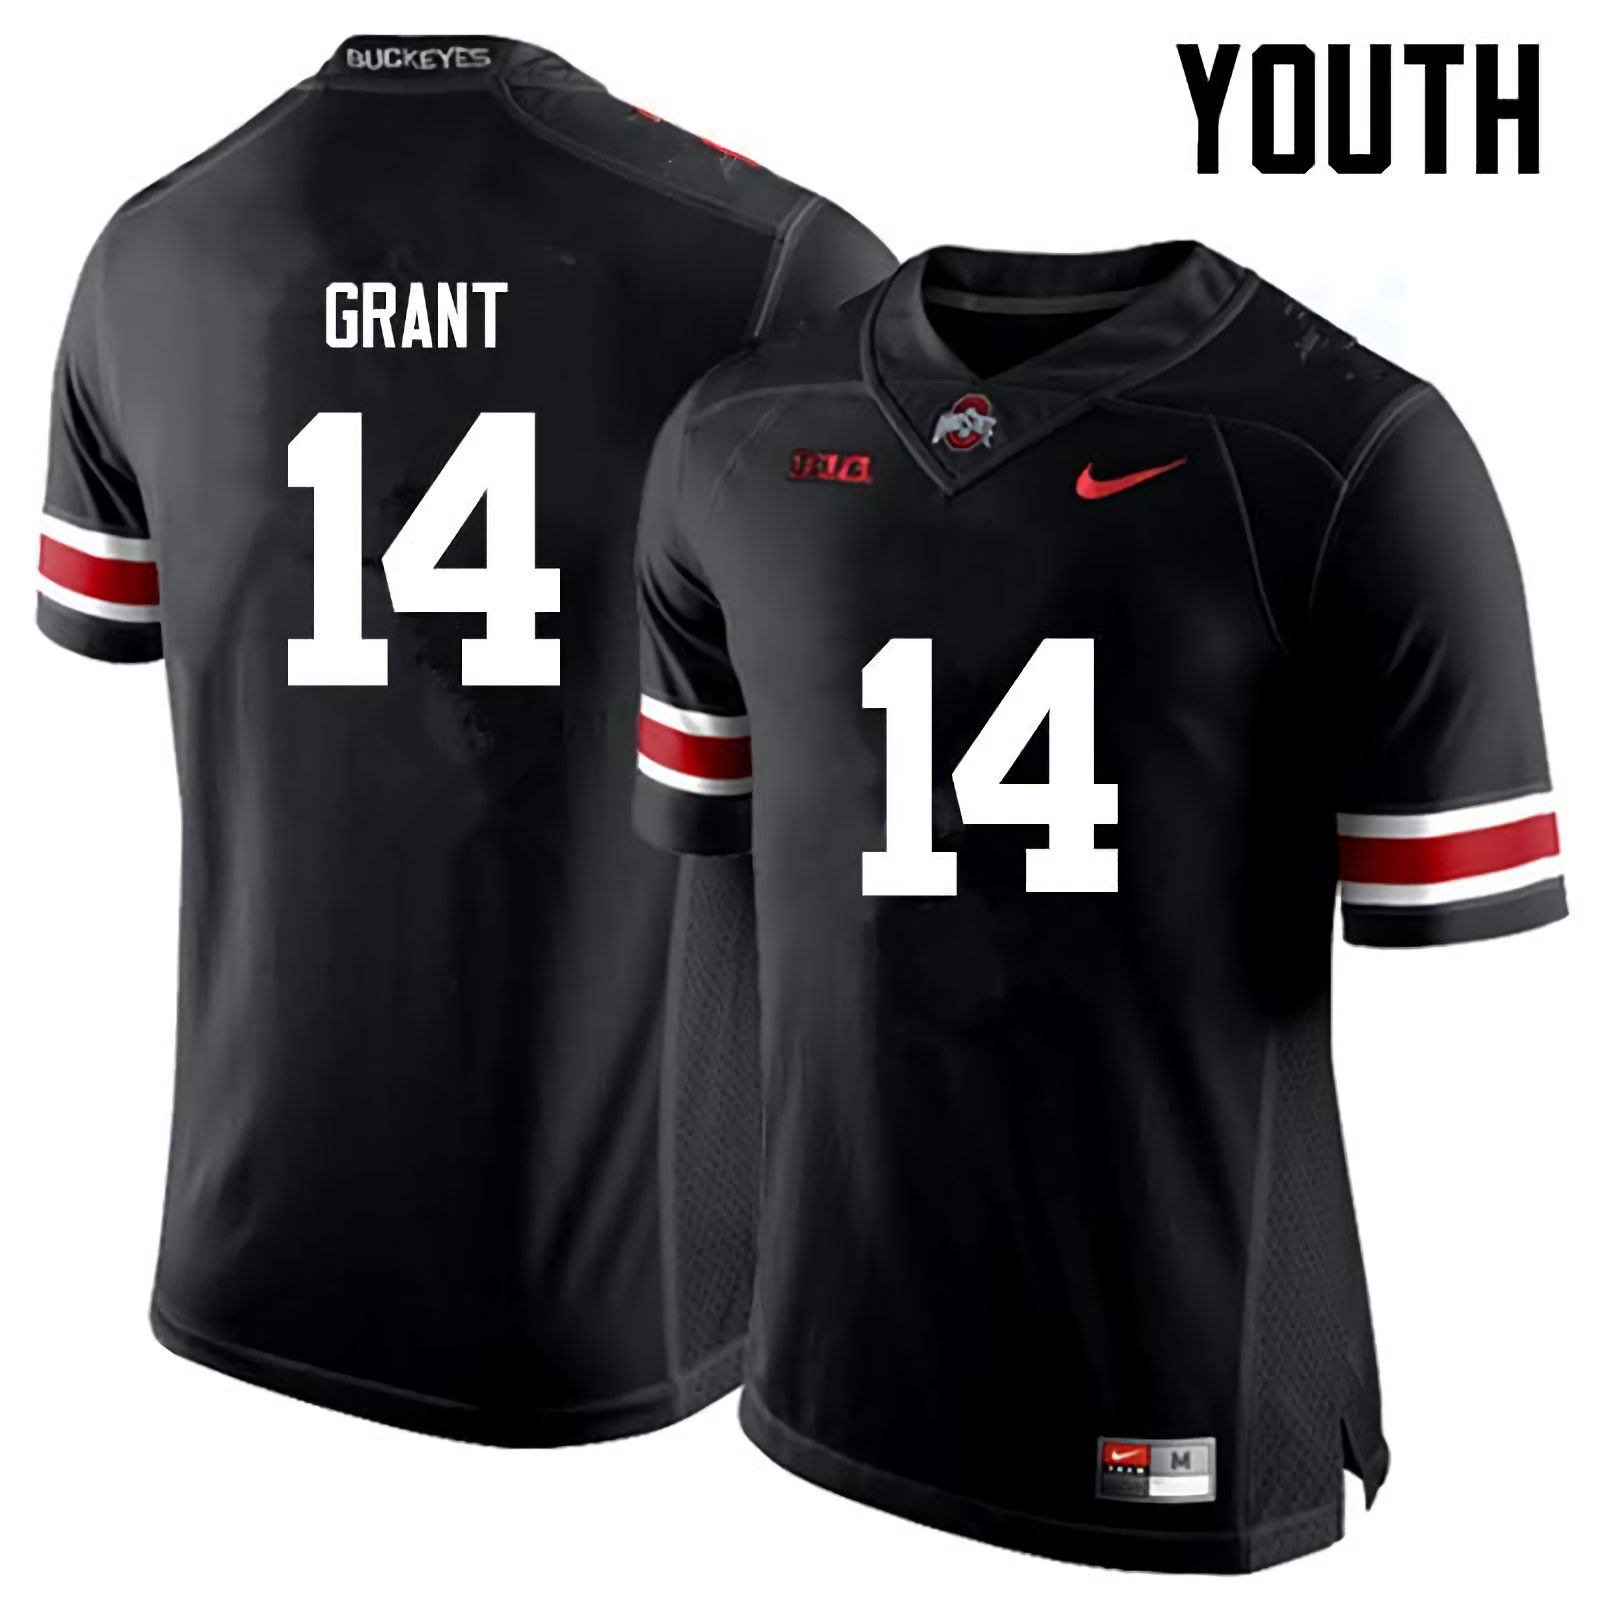 Curtis Grant Ohio State Buckeyes Youth NCAA #14 Nike Black College Stitched Football Jersey CSG8656OI